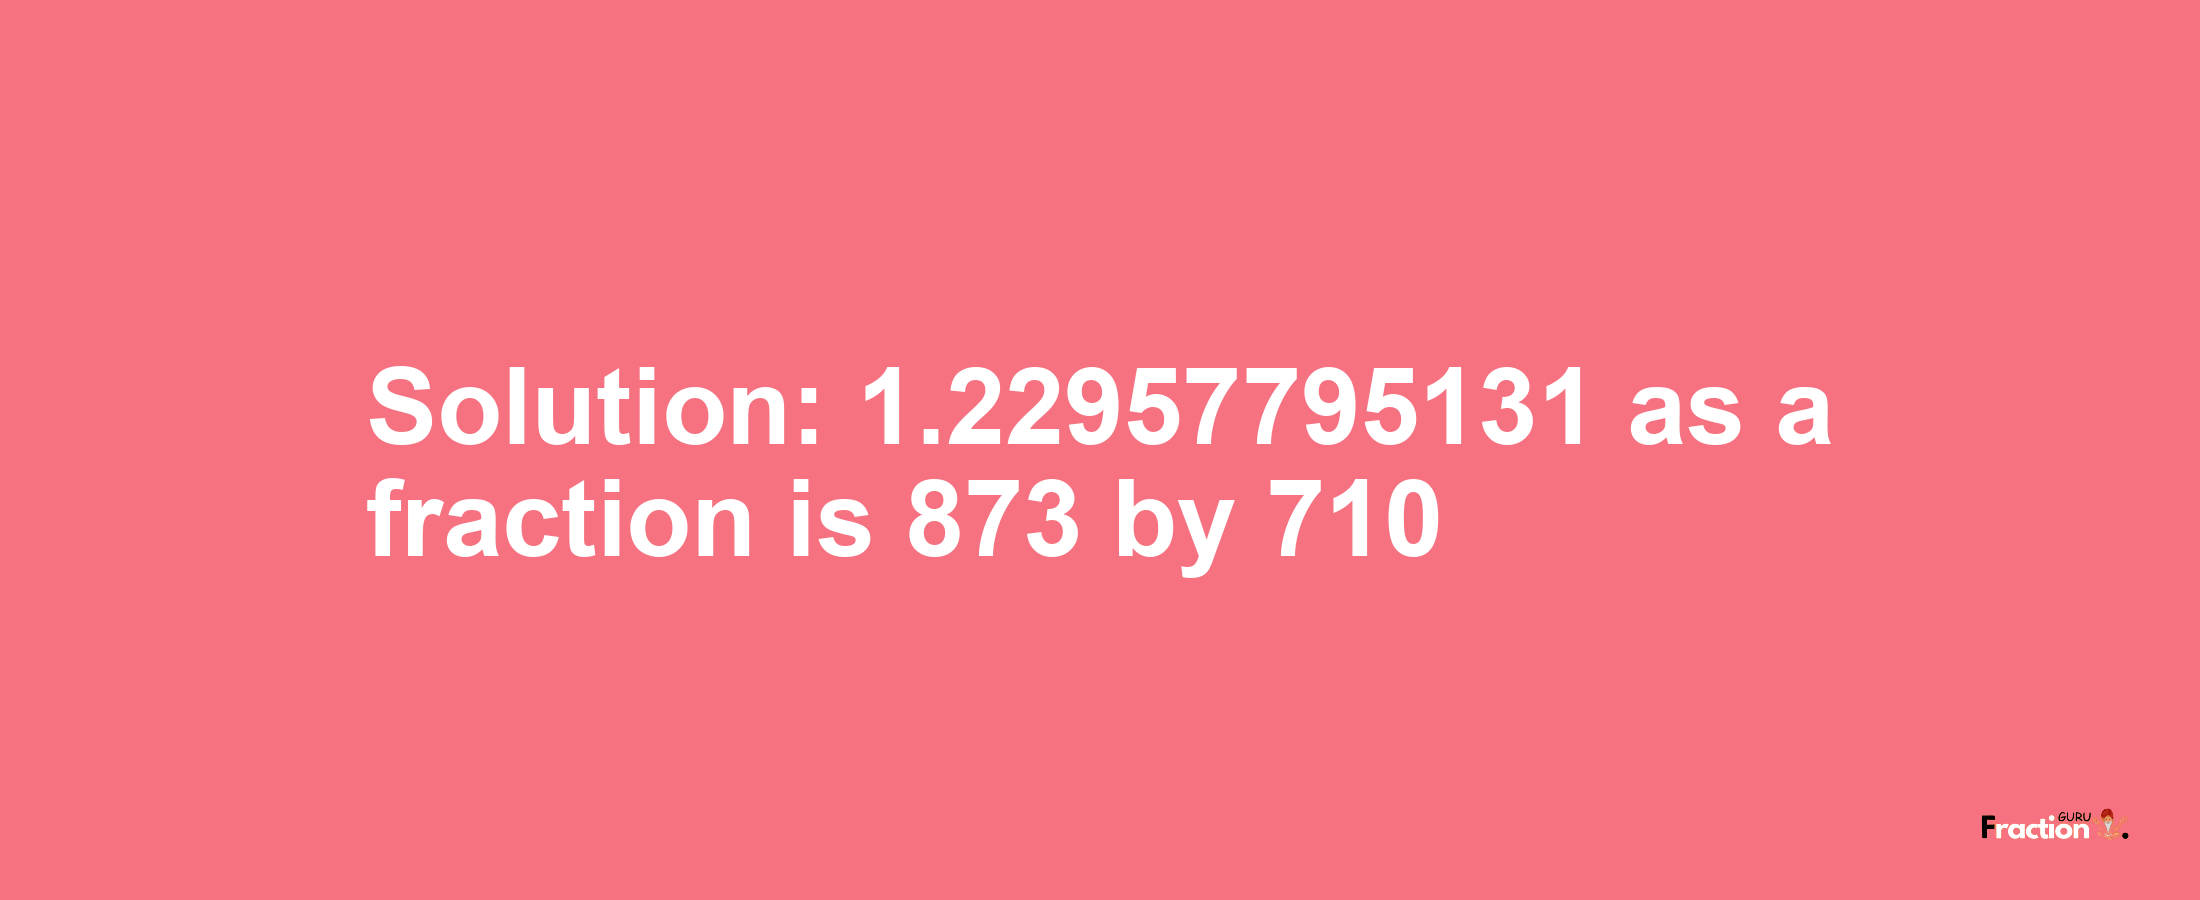 Solution:1.22957795131 as a fraction is 873/710